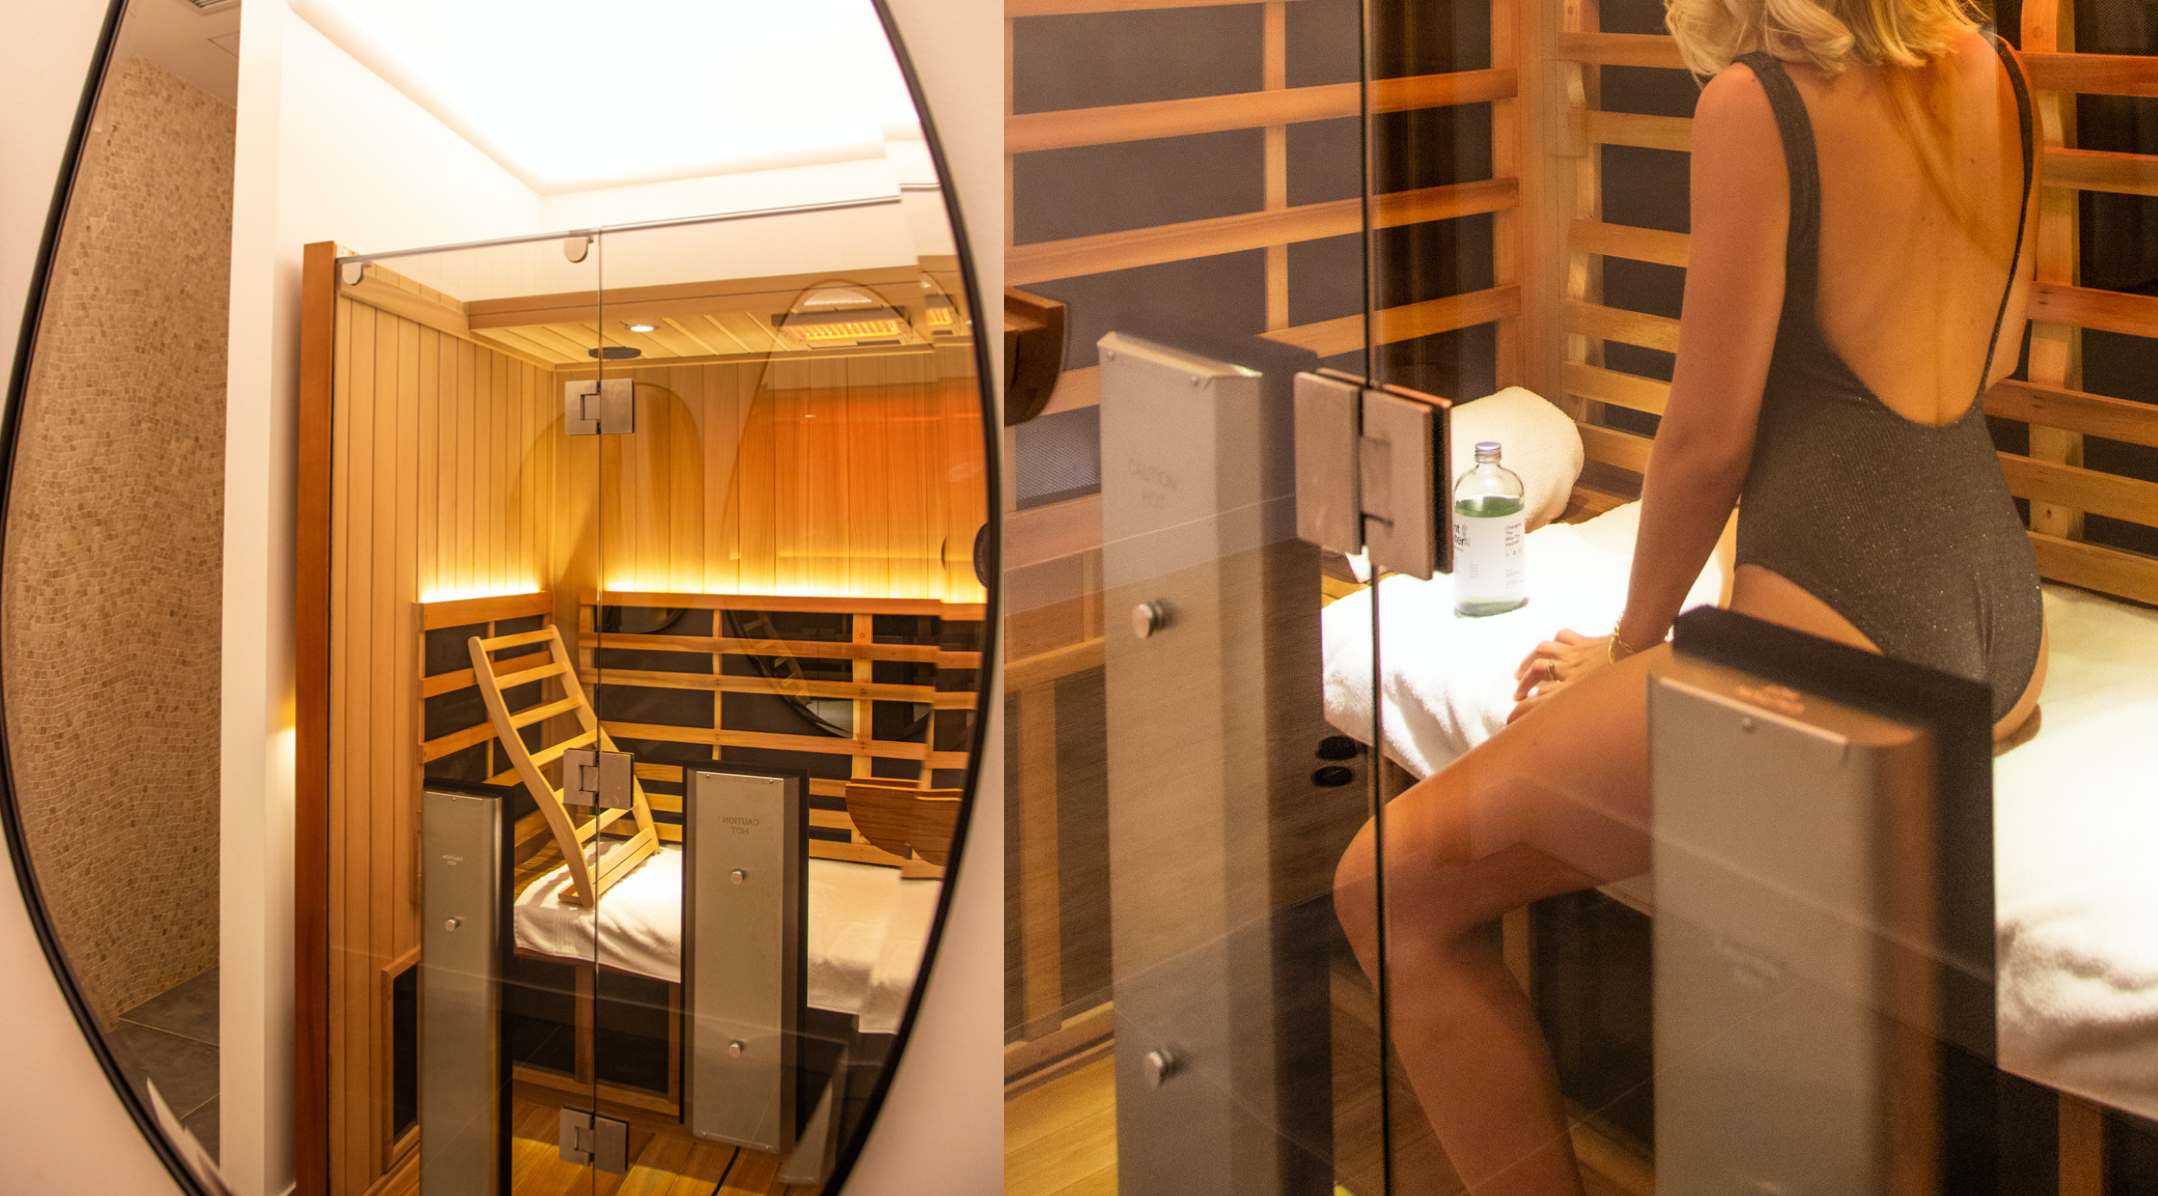 Take advantage of this offer to destress and relax with infrared sauna therapy on the regular